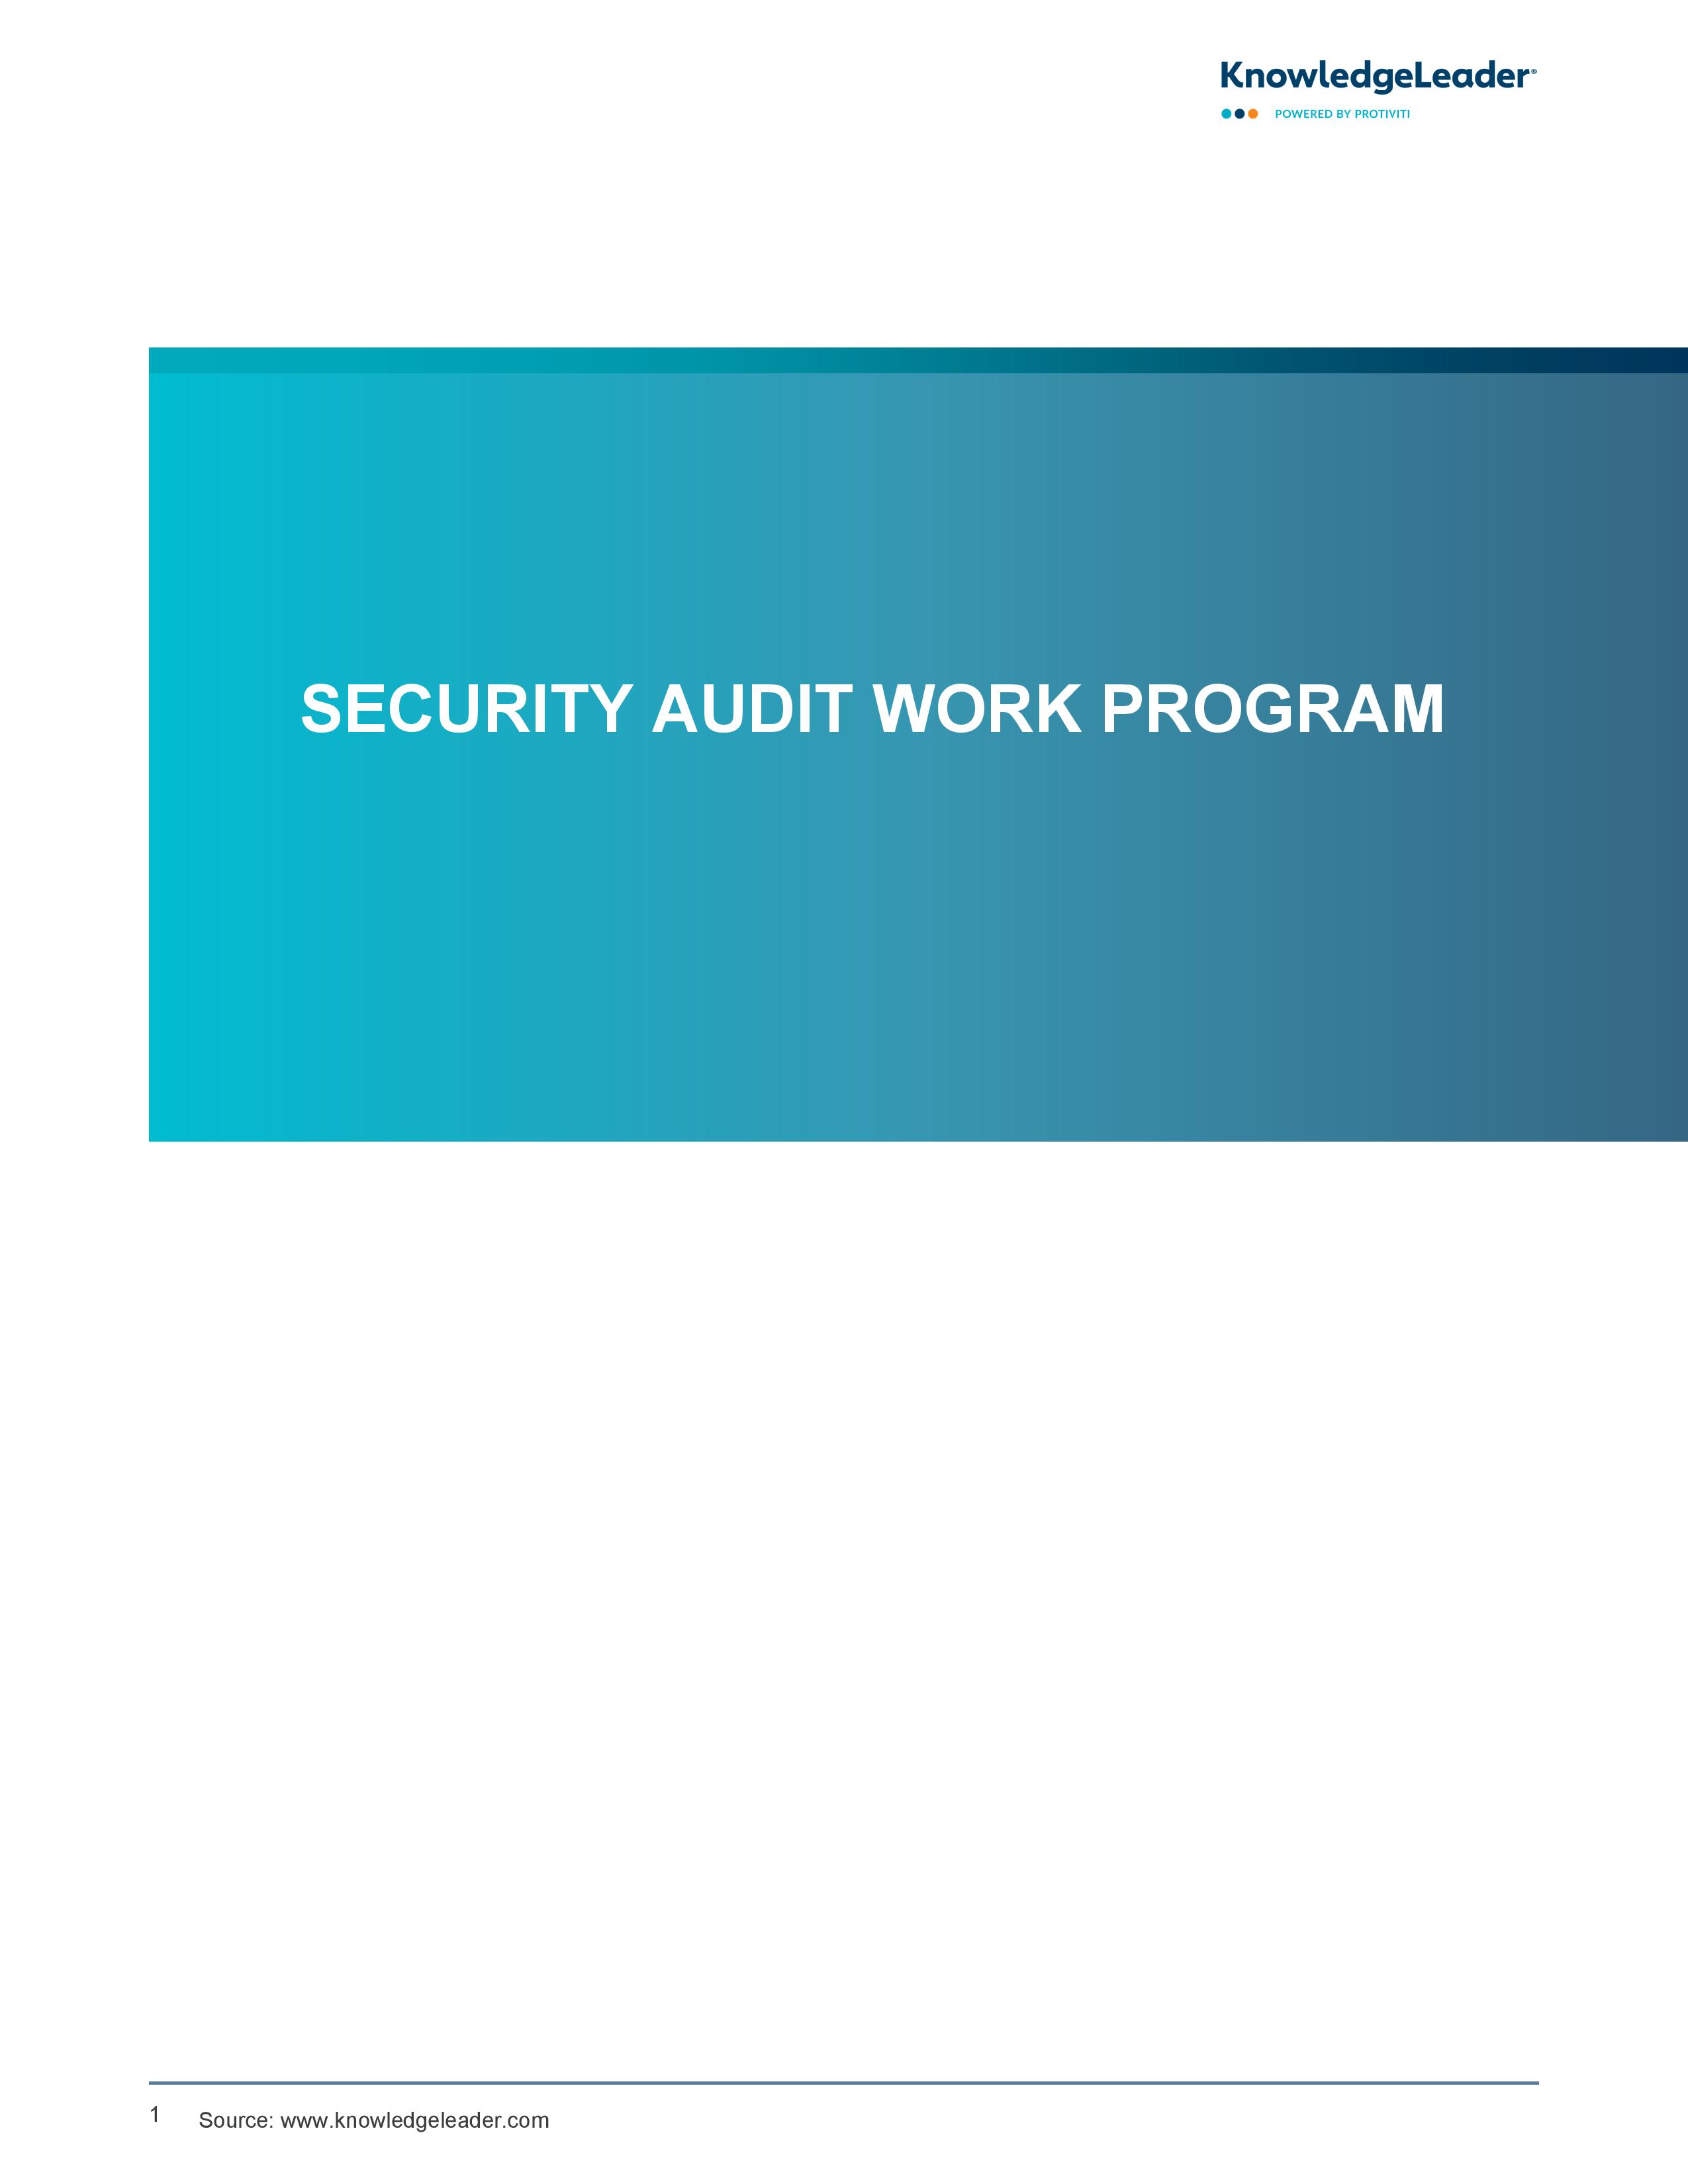 screenshot of the first page of Security Audit Work Program